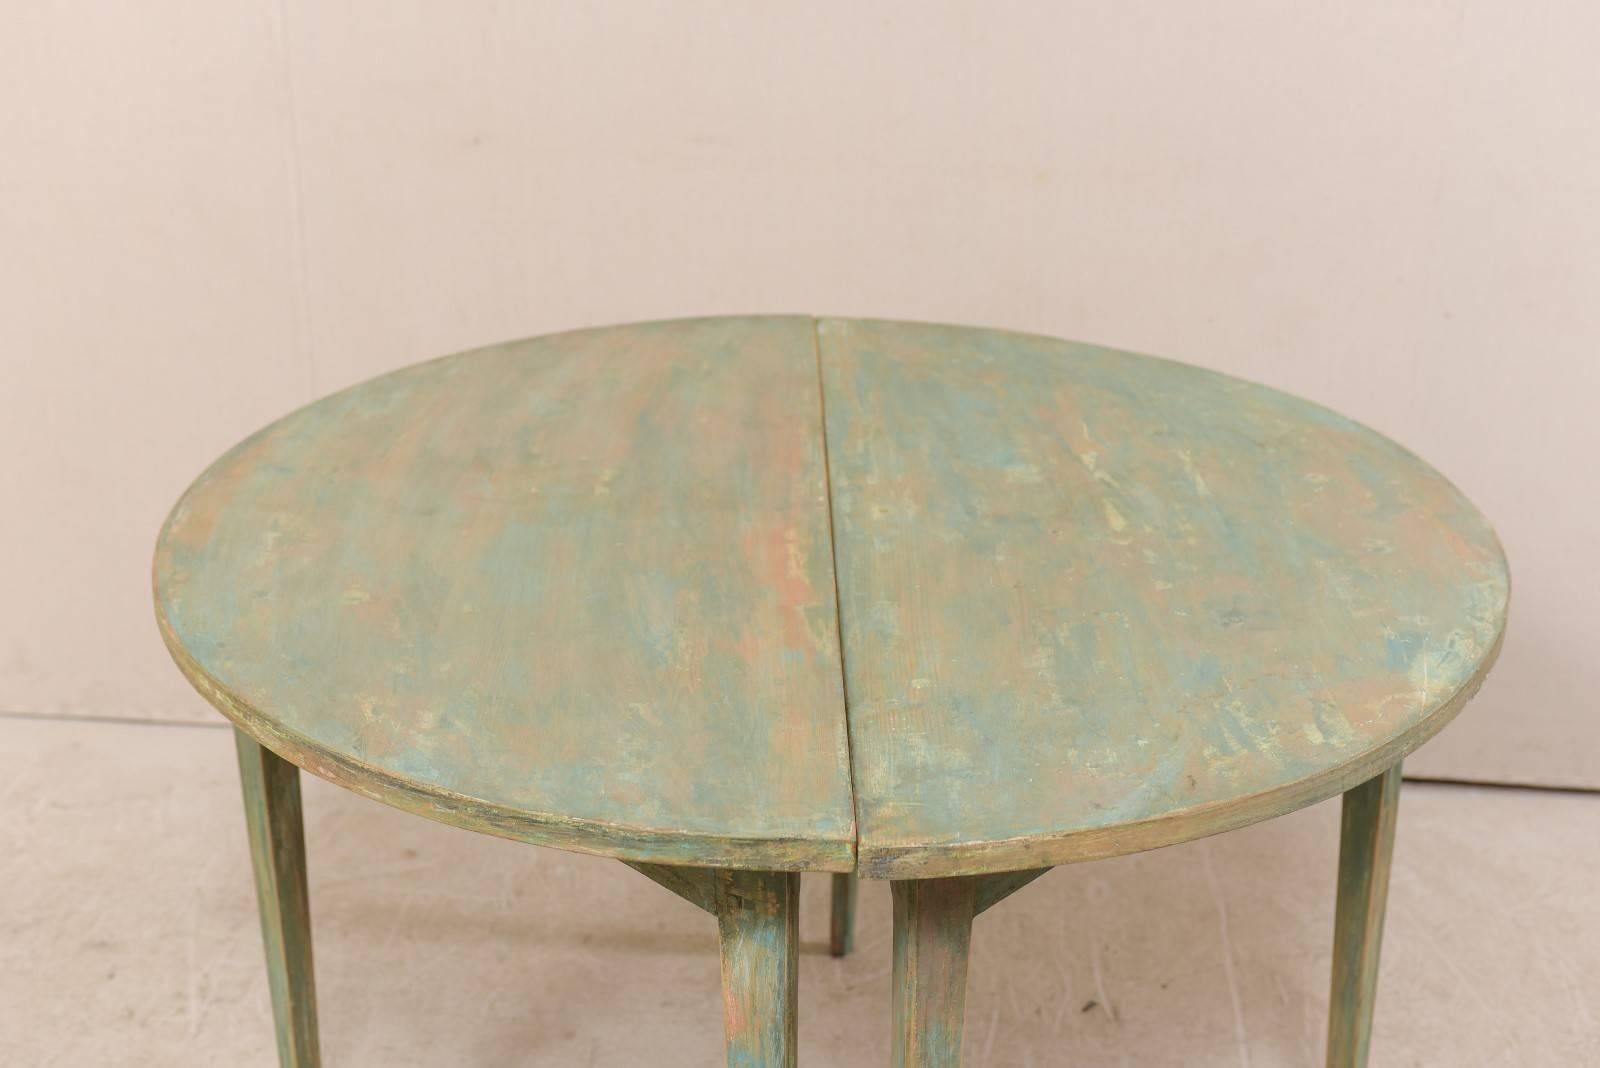 Pair of Swedish 19th Century Painted Wood Demilune Tables with Tapered Legs 3